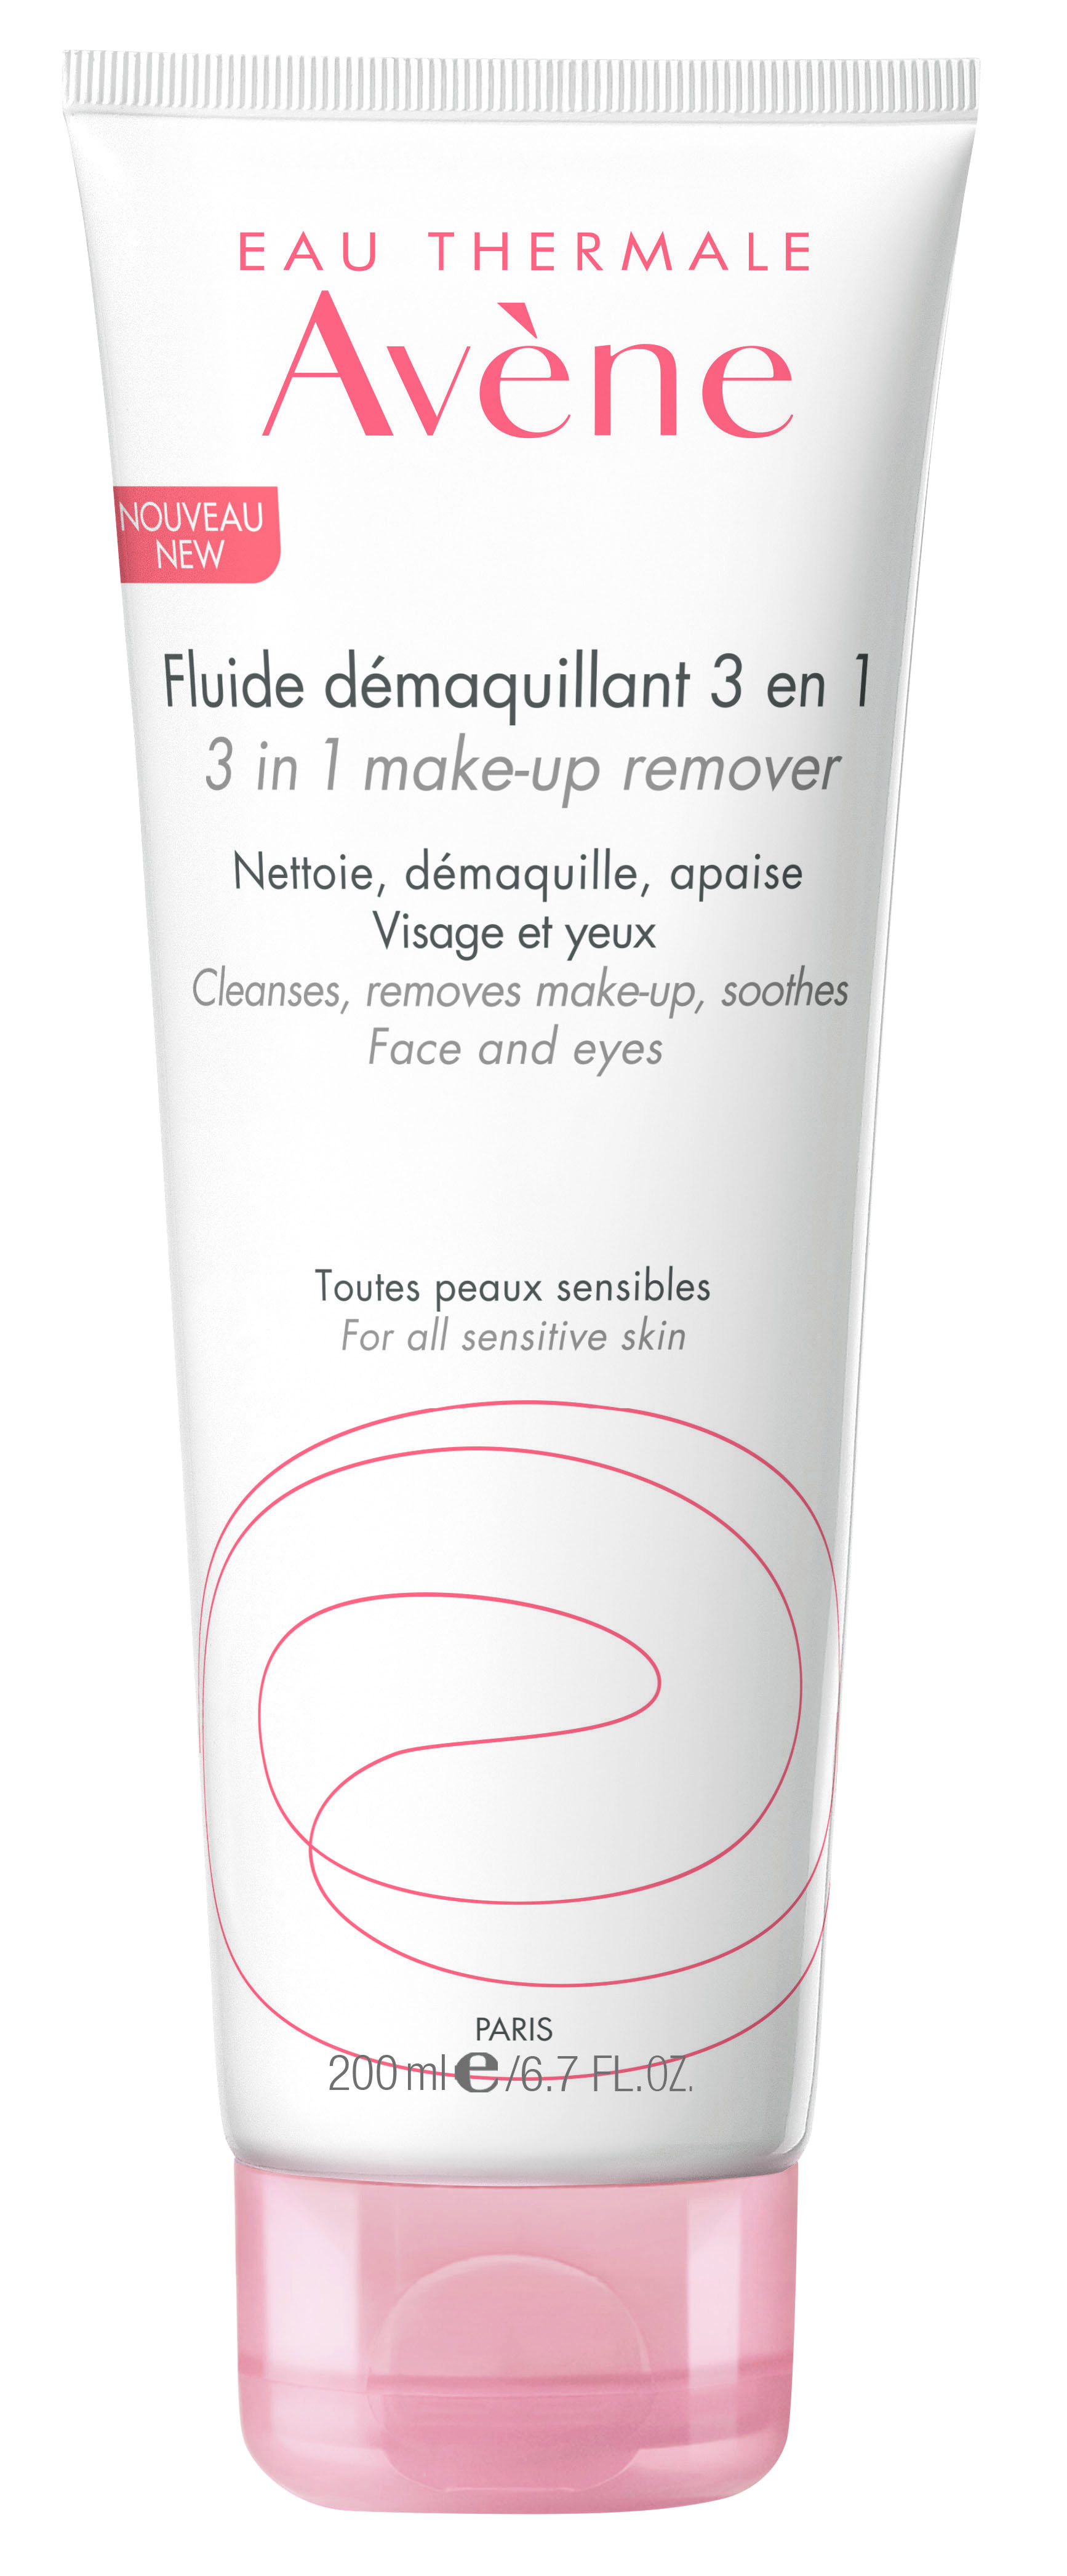 Avene 3 in 1, one of the best multitasking beauty products